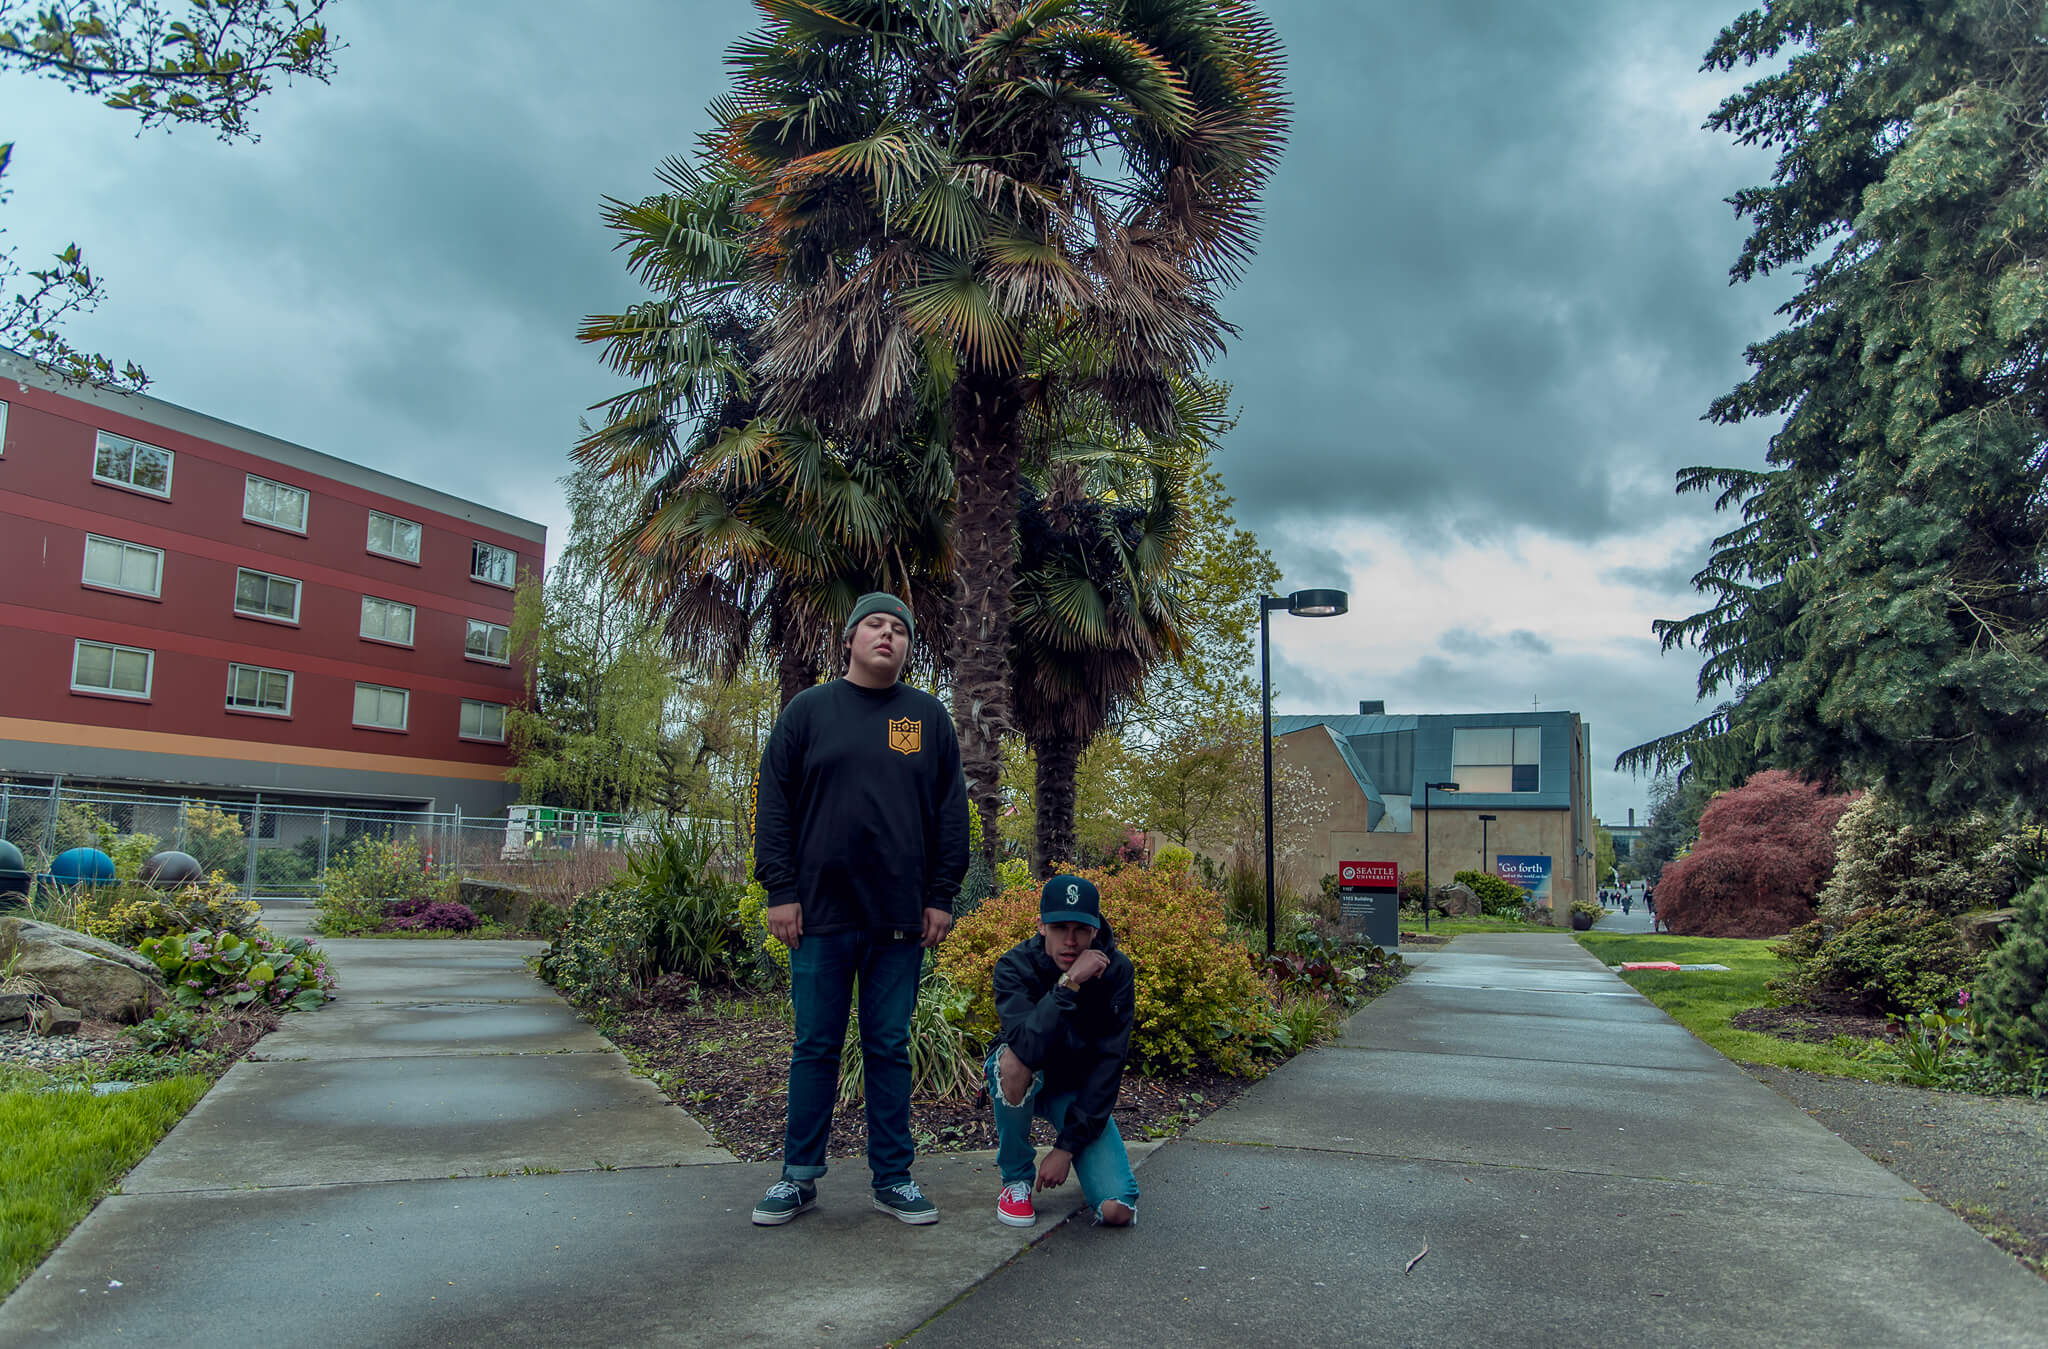 Two guys posing for a photography shot in front of palm trees